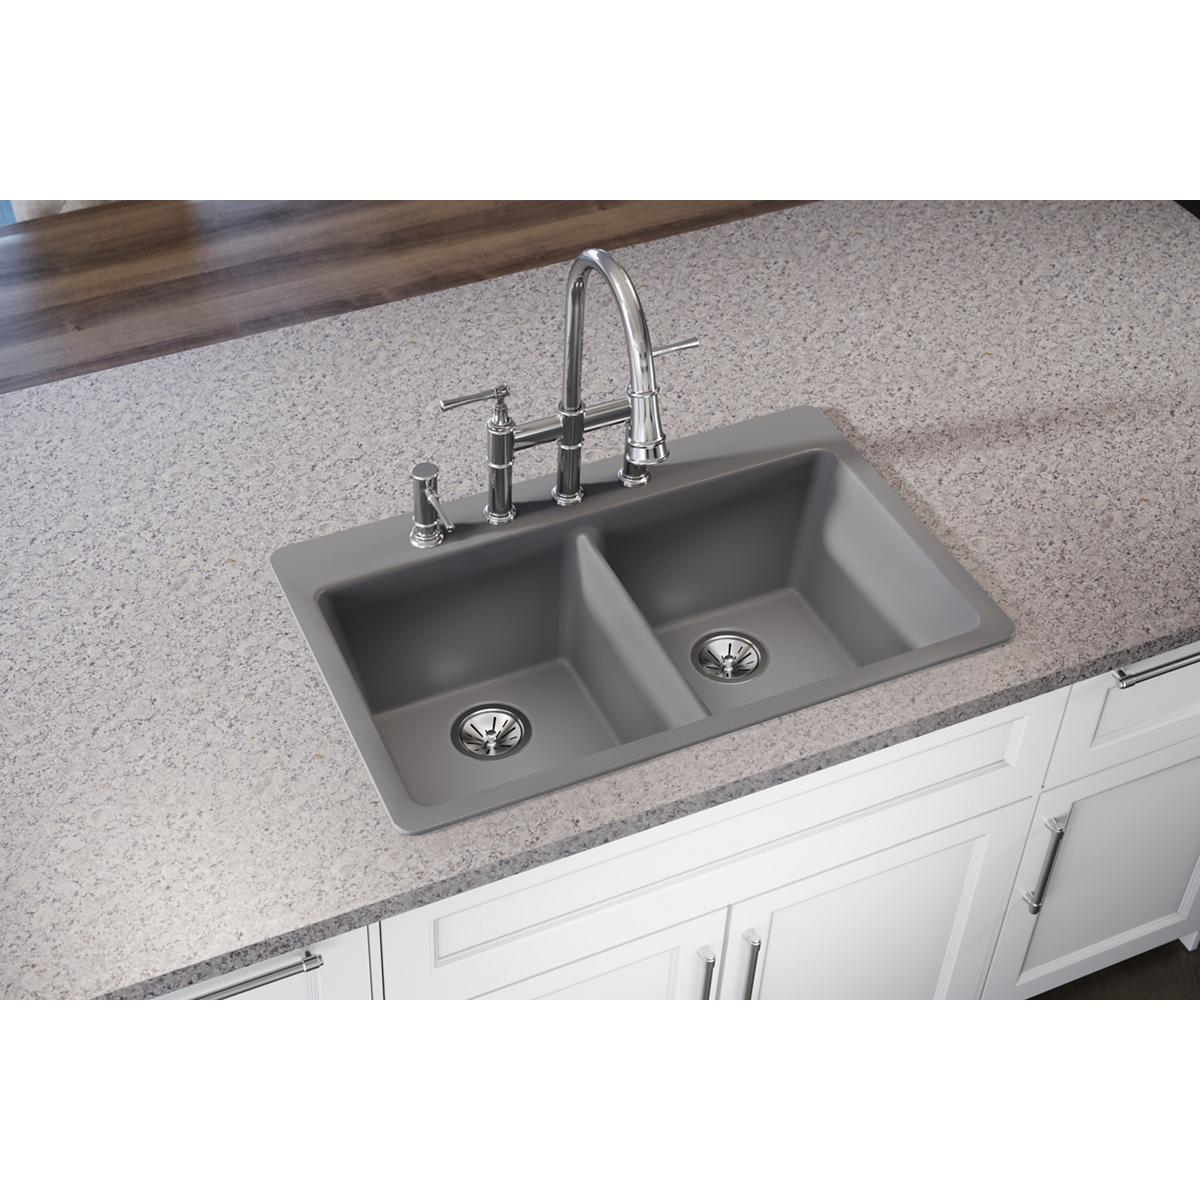 black equal double bowl drop-in sink